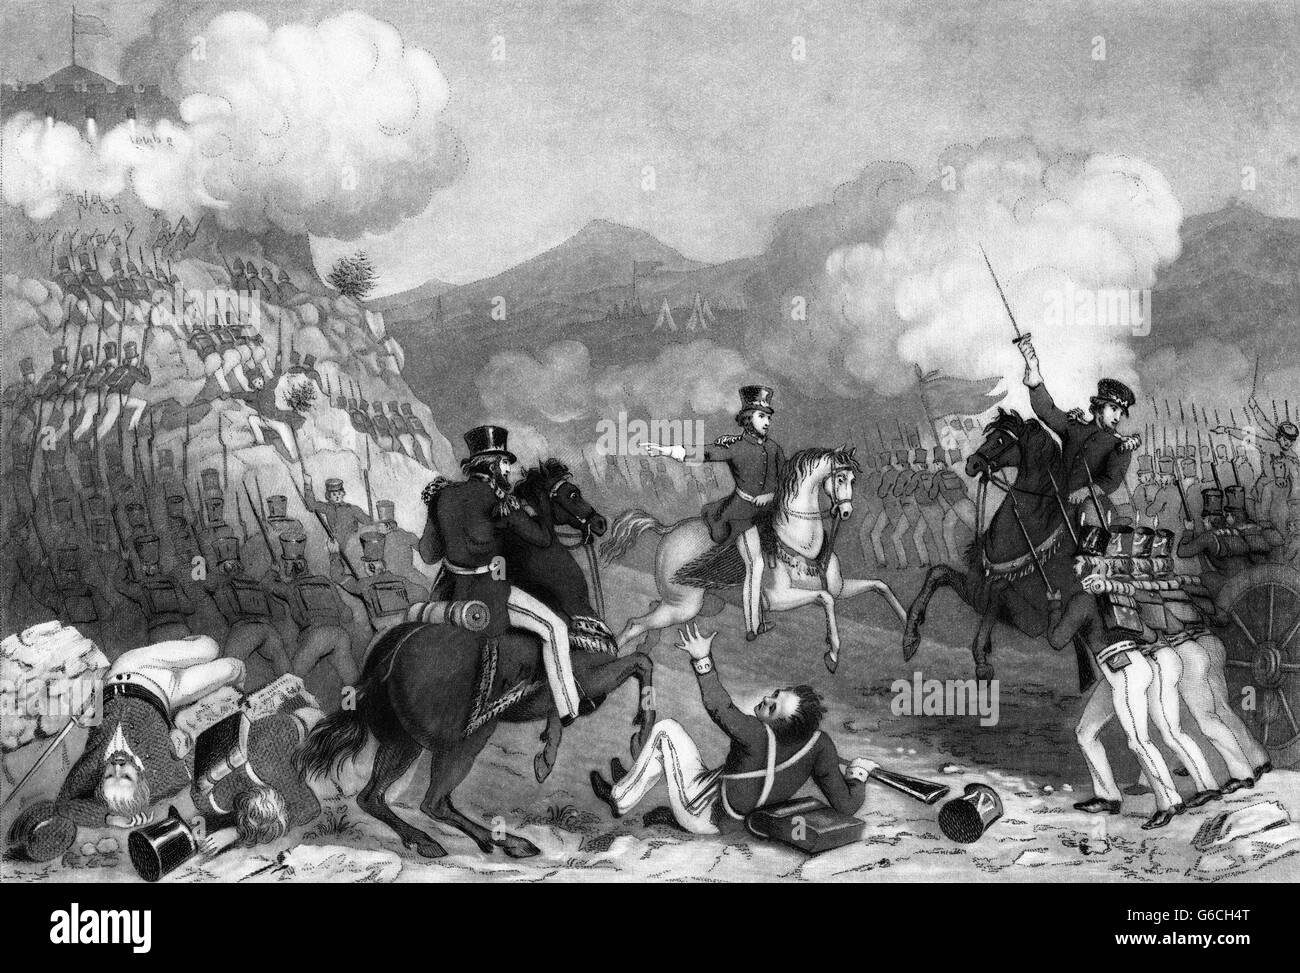 1840s SEPTEMBER 1847 AMERICAN TROOPS STORMING PALACE HILL AT THE BATTLE OF CHAPULTEPEC MEXICAN AMERICAN WAR Stock Photo